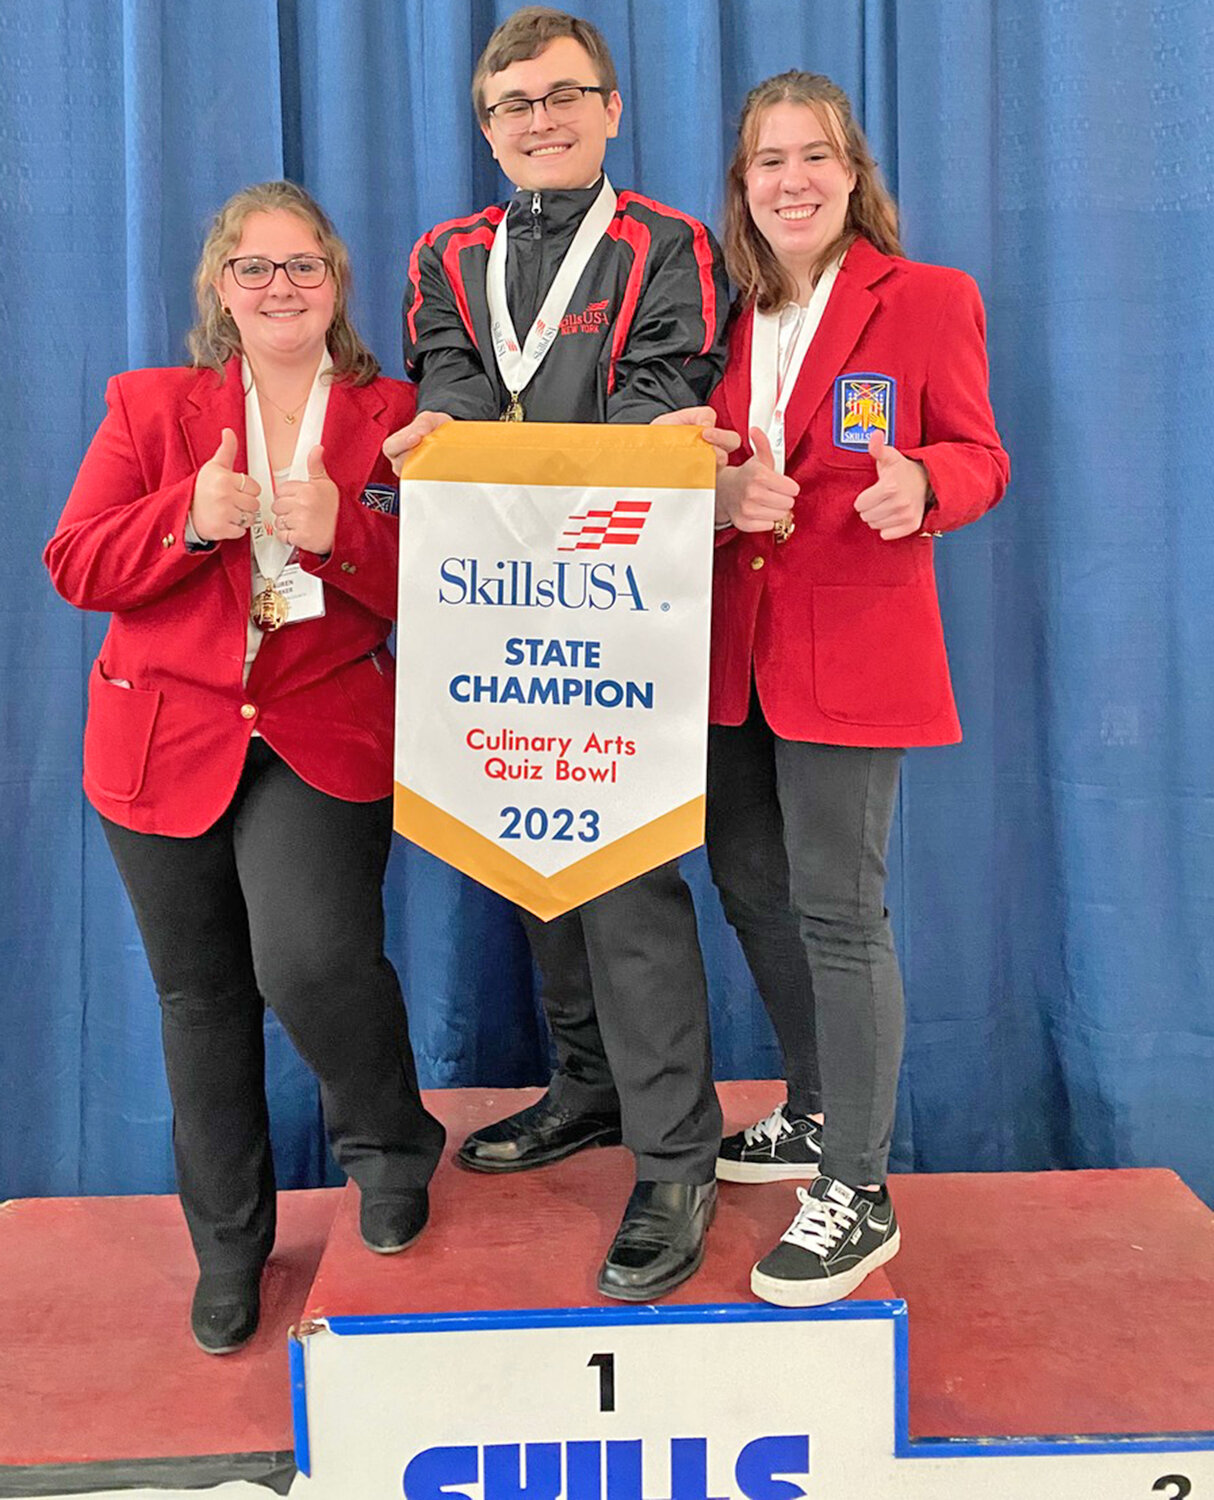 Madison-Oneida BOCES Advanced Culinary Experience seniors, from left, Lauren Barker, Cody Csigi and Brianna Roberts recently took first place in the Culinary Arts Quiz Bowl at the SkillsUSA NYS Championships.